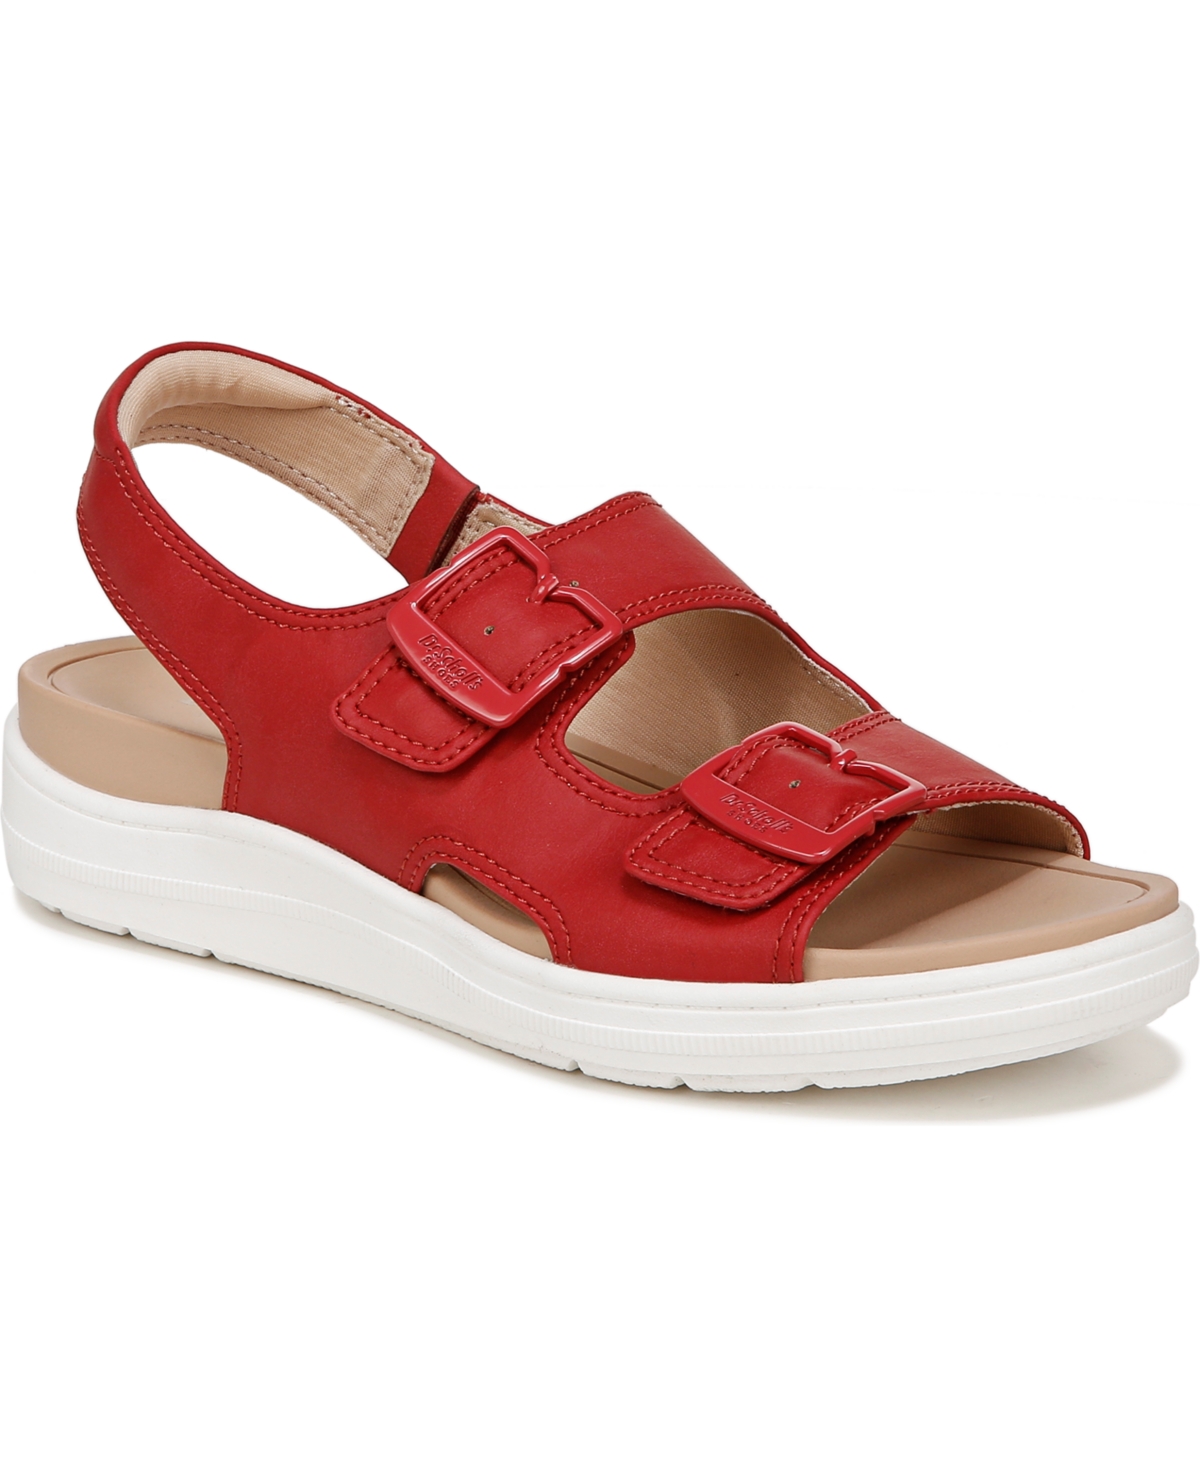 Women's Time Off Era Strappy Sandals - Heritage Red Faux Leather